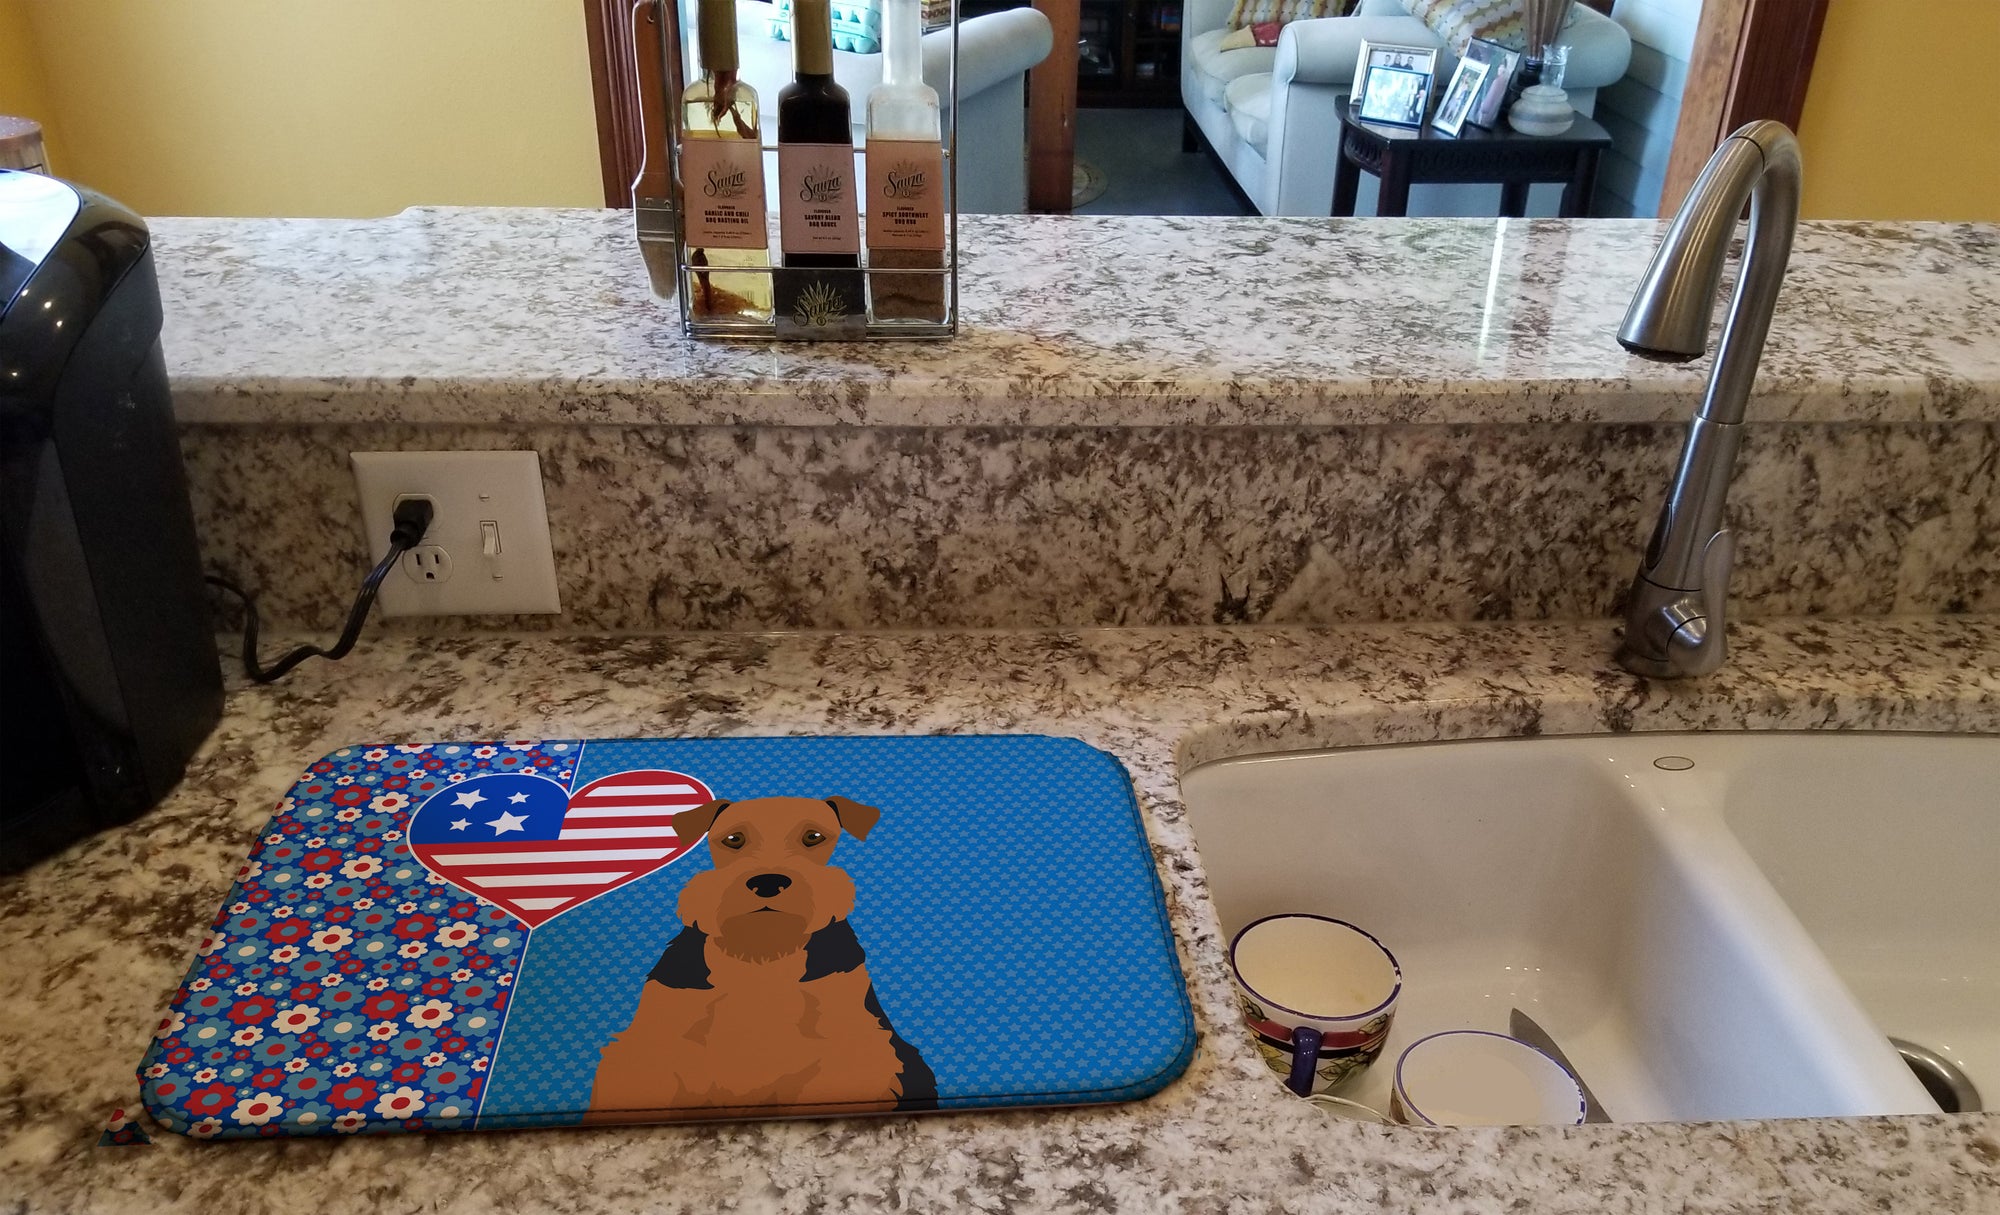 Black and Tan Airedale Terrier USA American Dish Drying Mat  the-store.com.